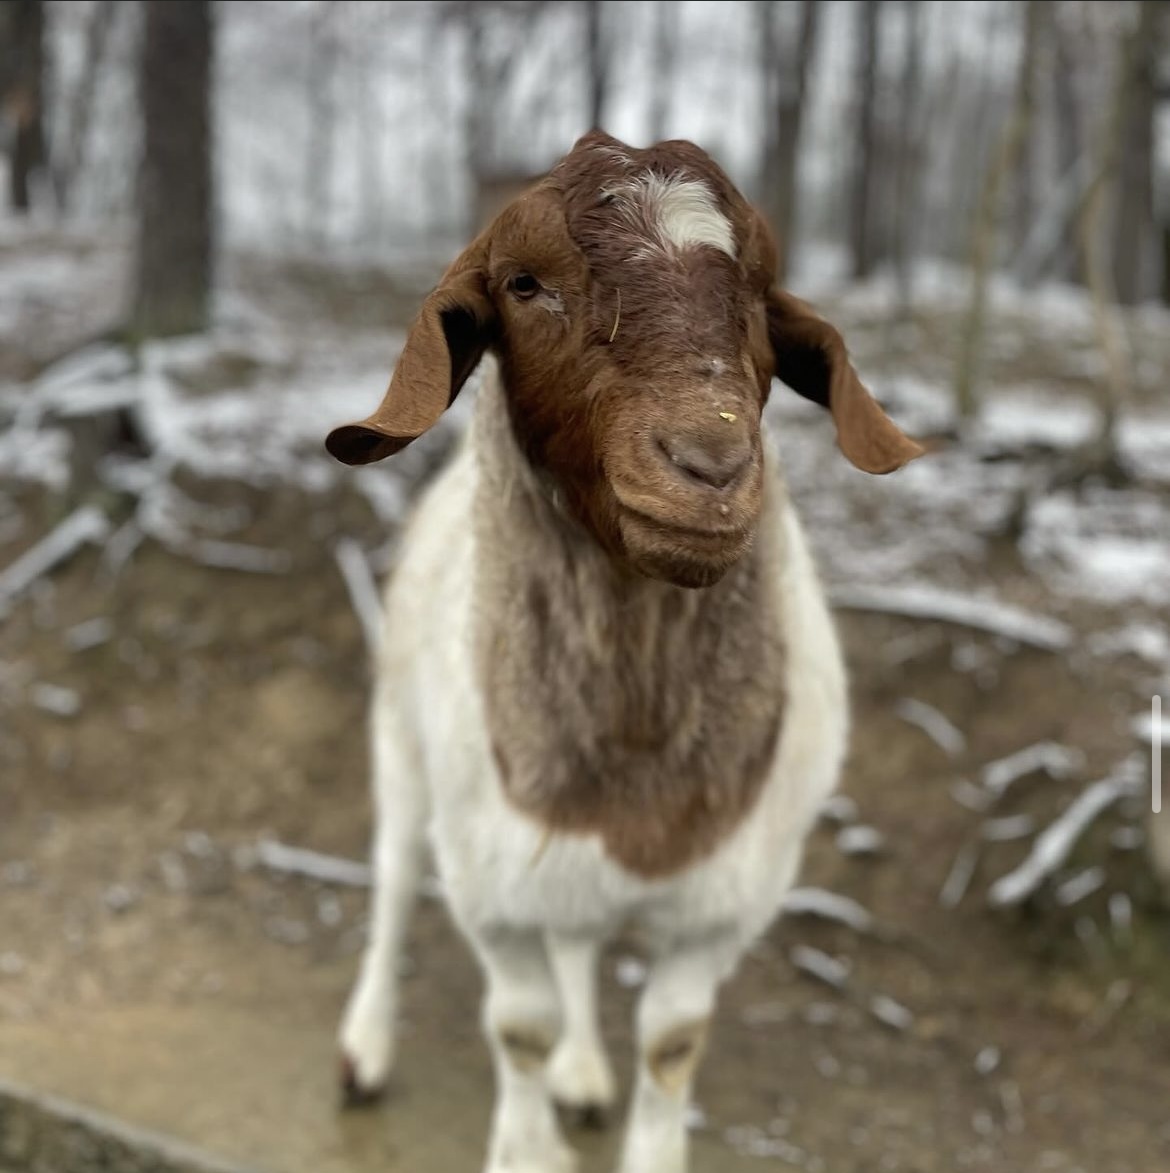 A photo of a goat at Hope Haven Farm Sanctuary, an animal sanctuary near Pittsburgh.